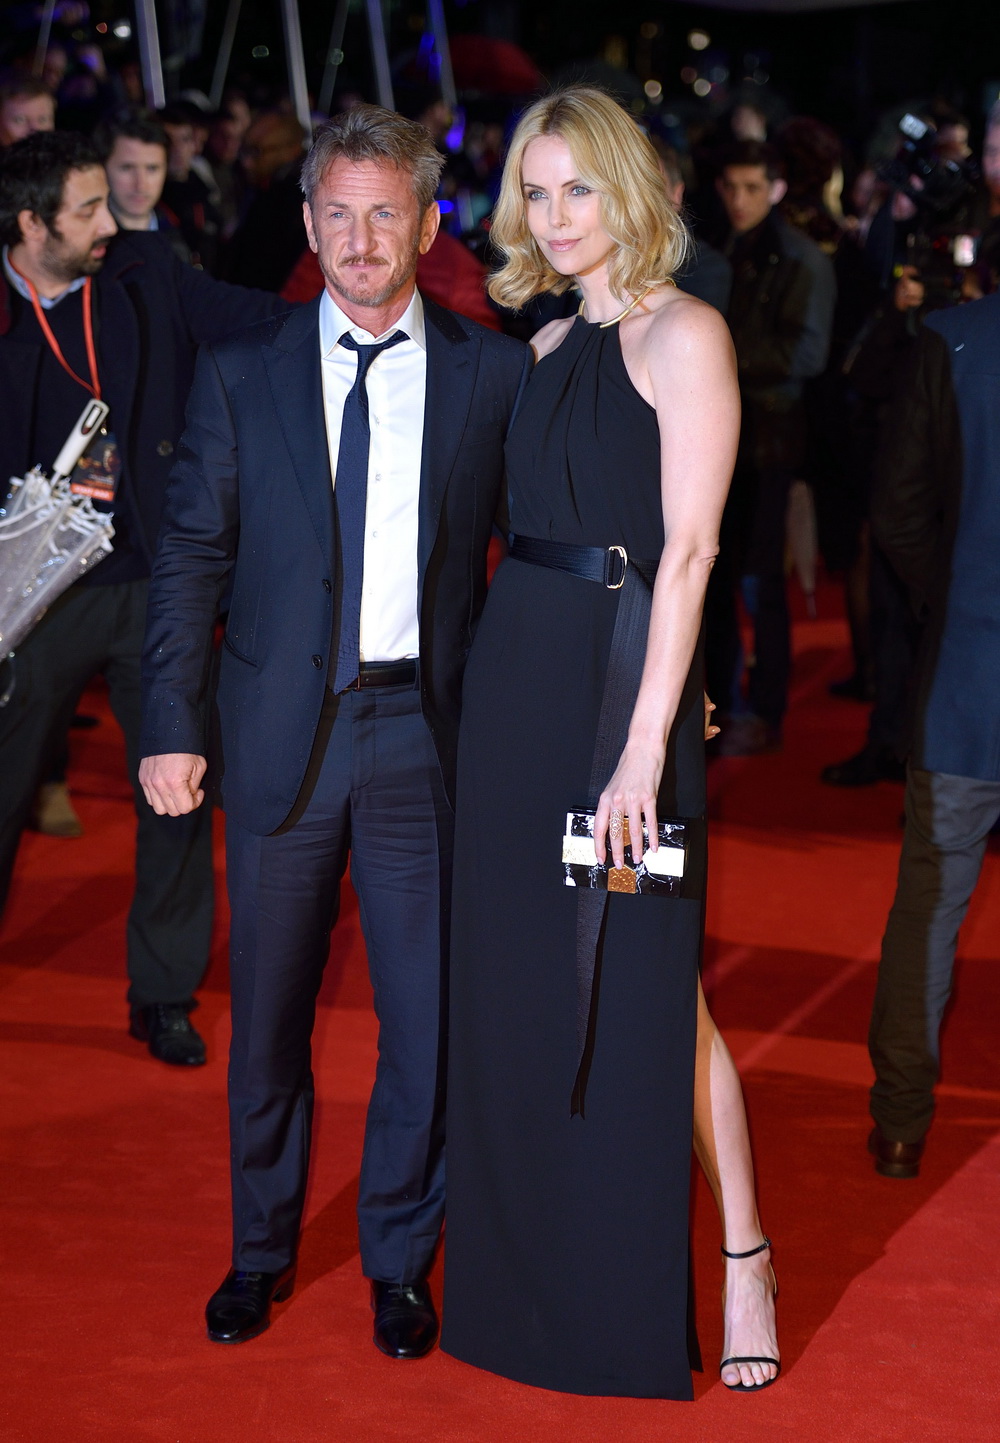 LONDON, ENGLAND - FEBRUARY 16:  Sean Penn and Charlize Theron attend the World Premiere of "The Gunman" at BFI Southbank on February 16, 2015 in London, England.  (Photo by Karwai Tang/WireImage)